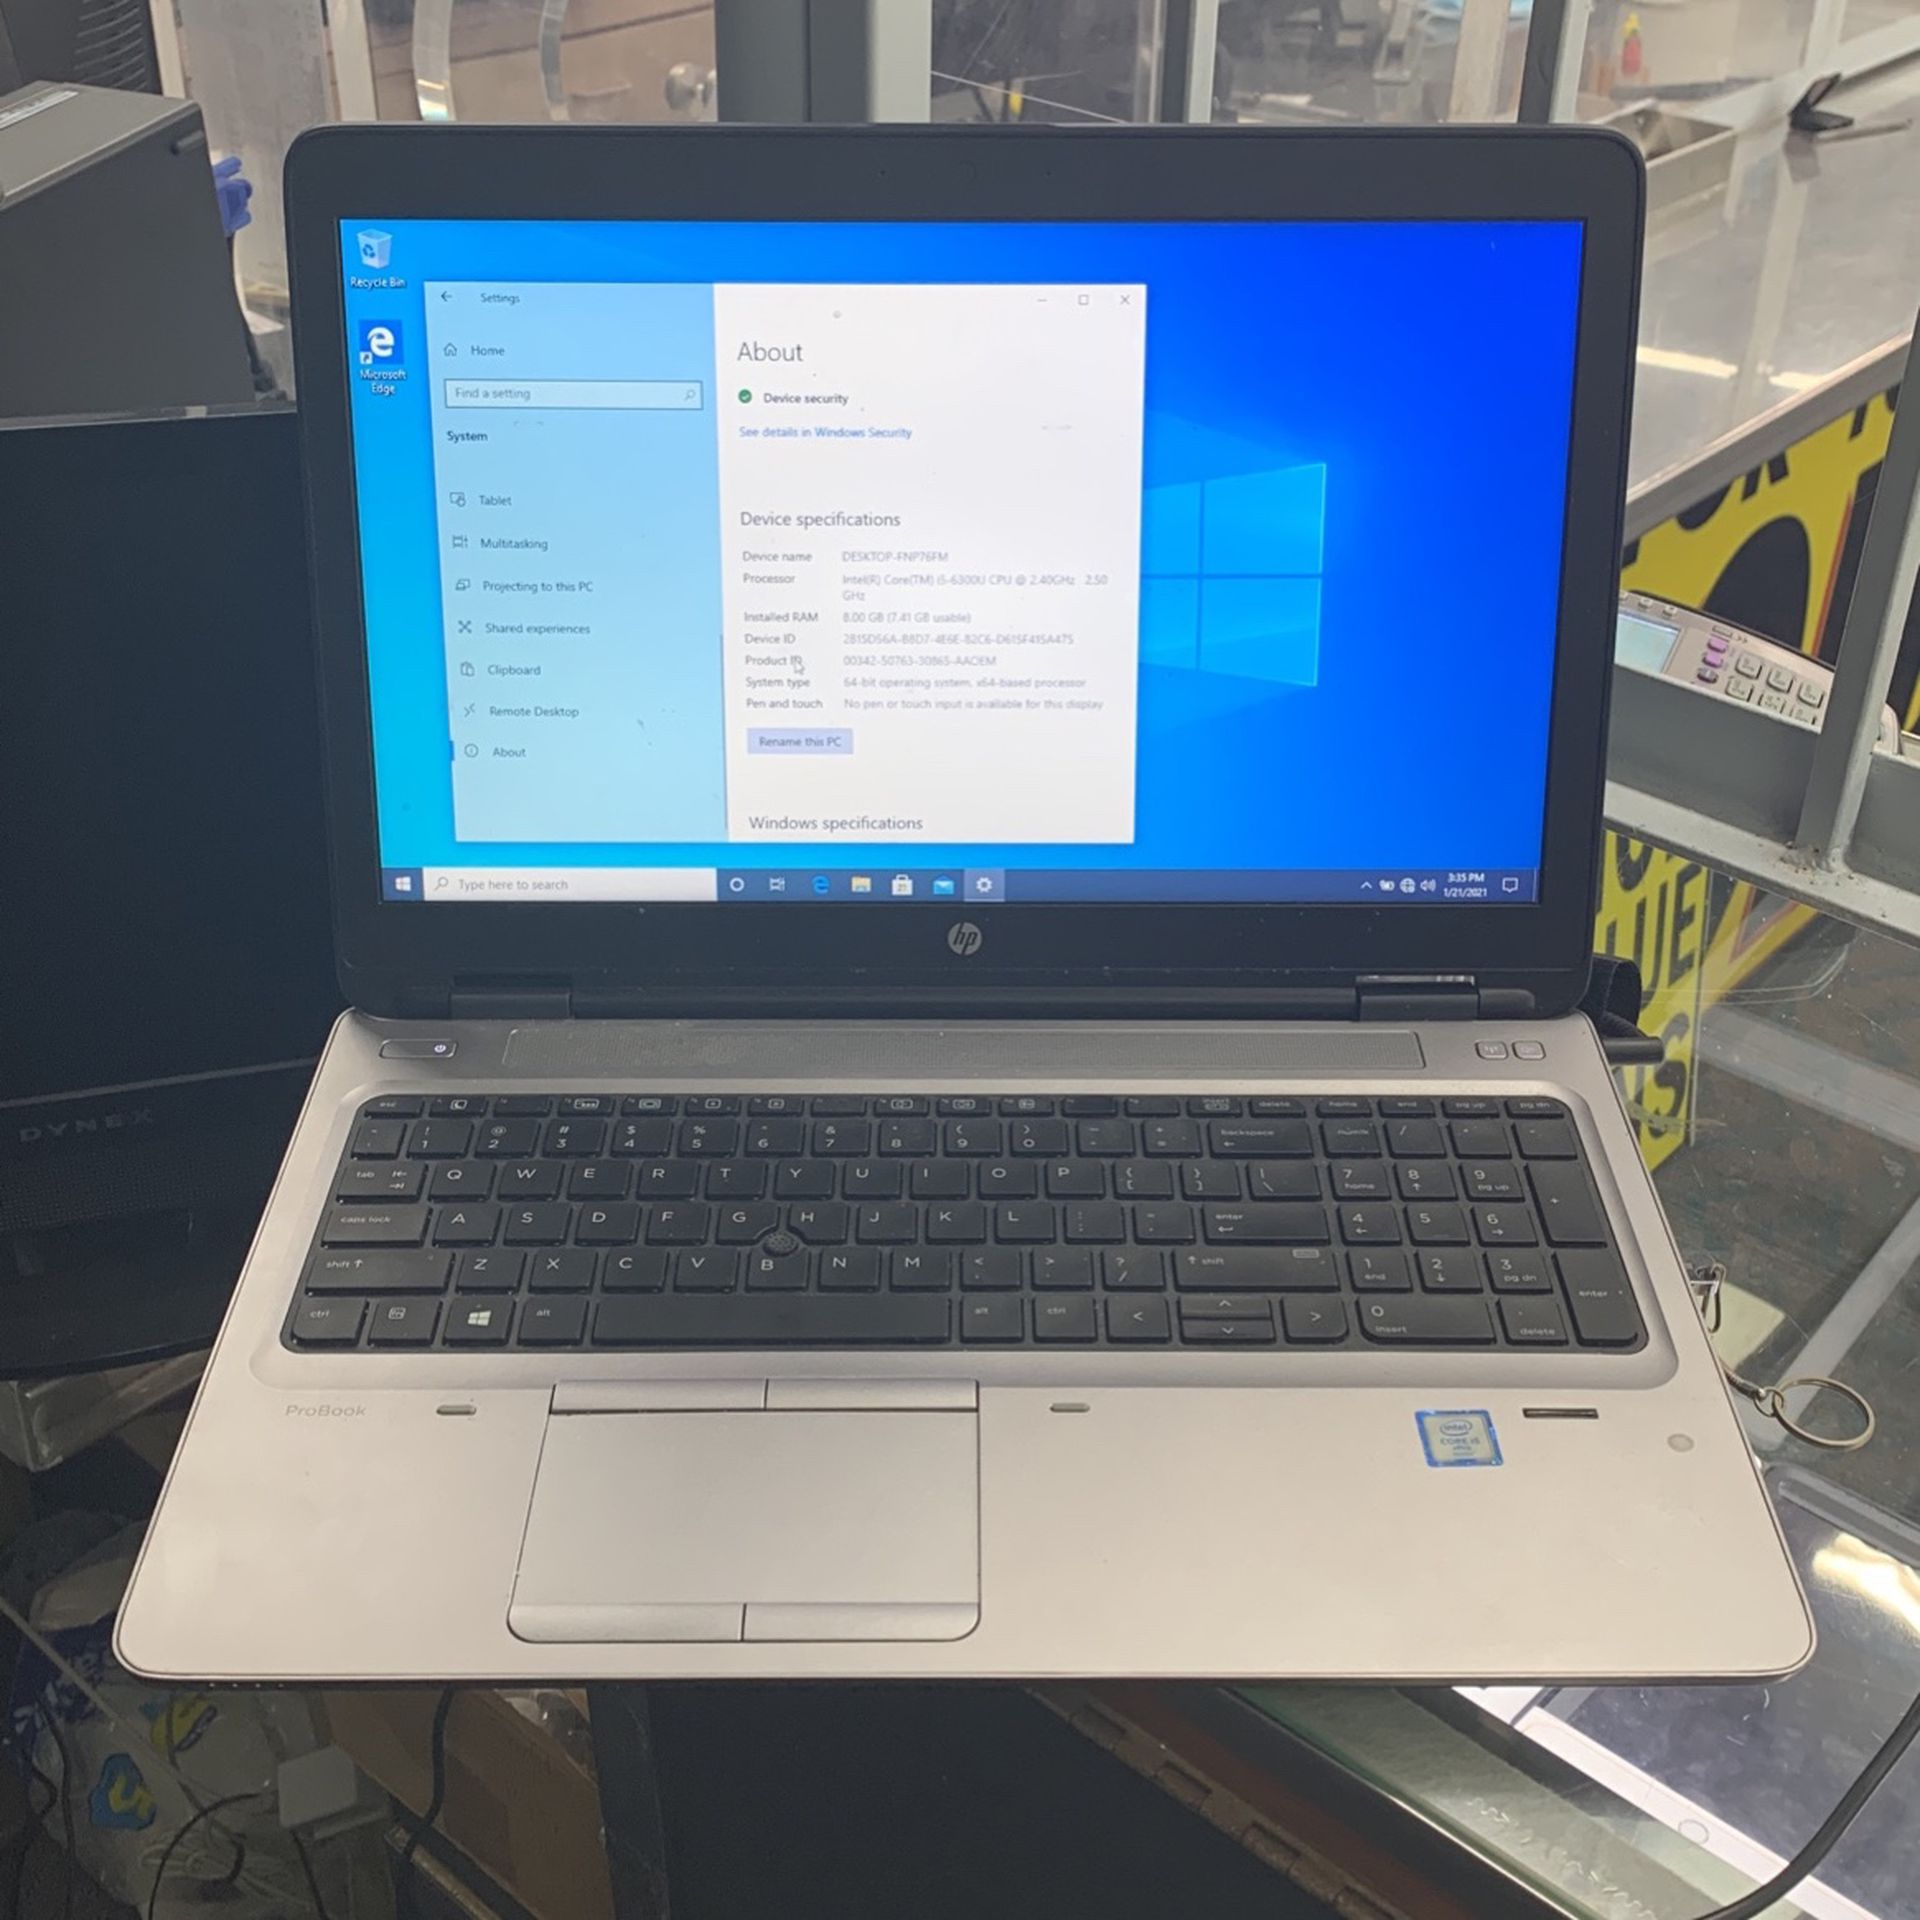 HP Pro book 650 Laptop i5,8gb, 256SSD Very Fast! Retail $1100